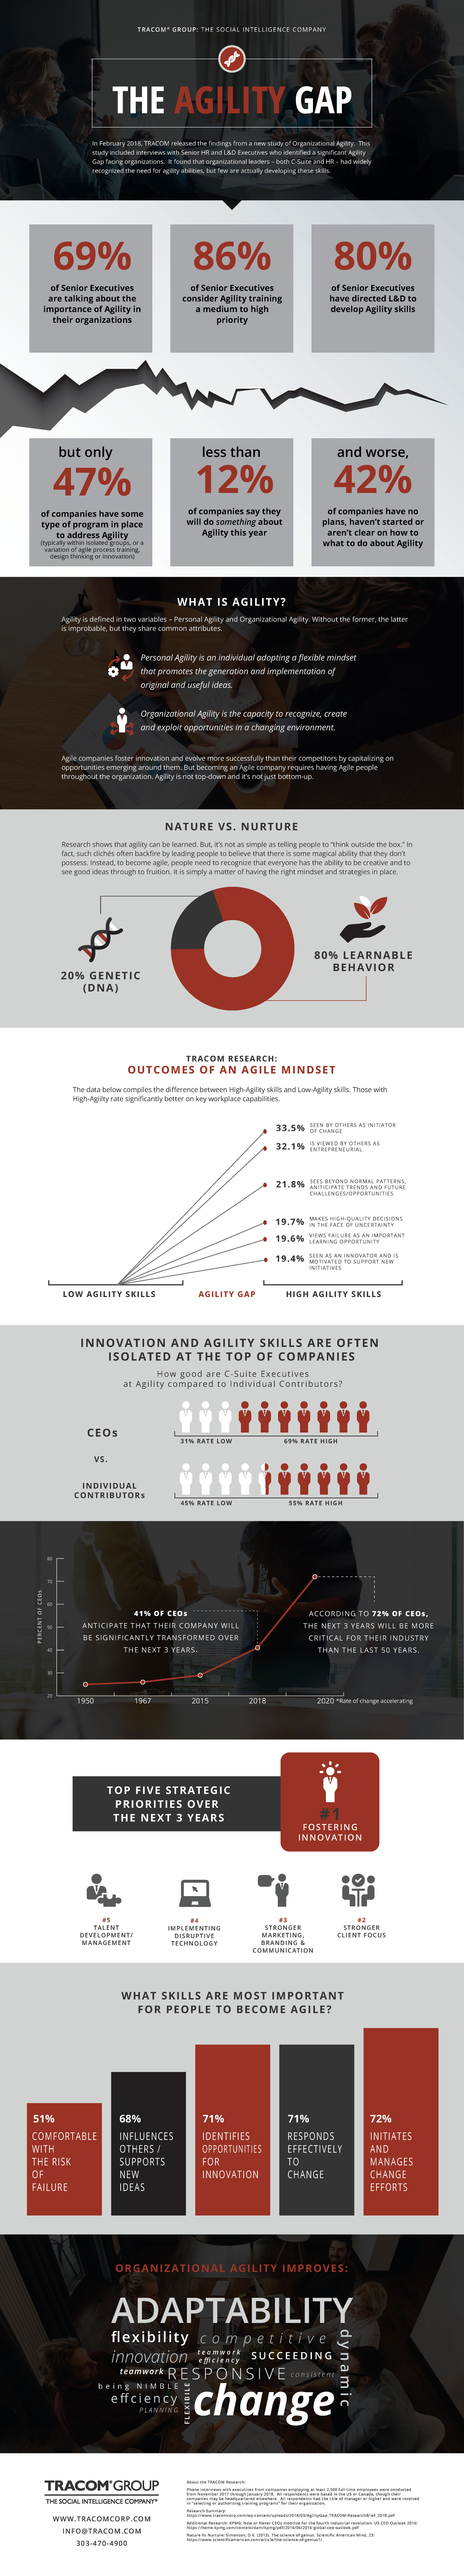 The Agility Gap Infographic